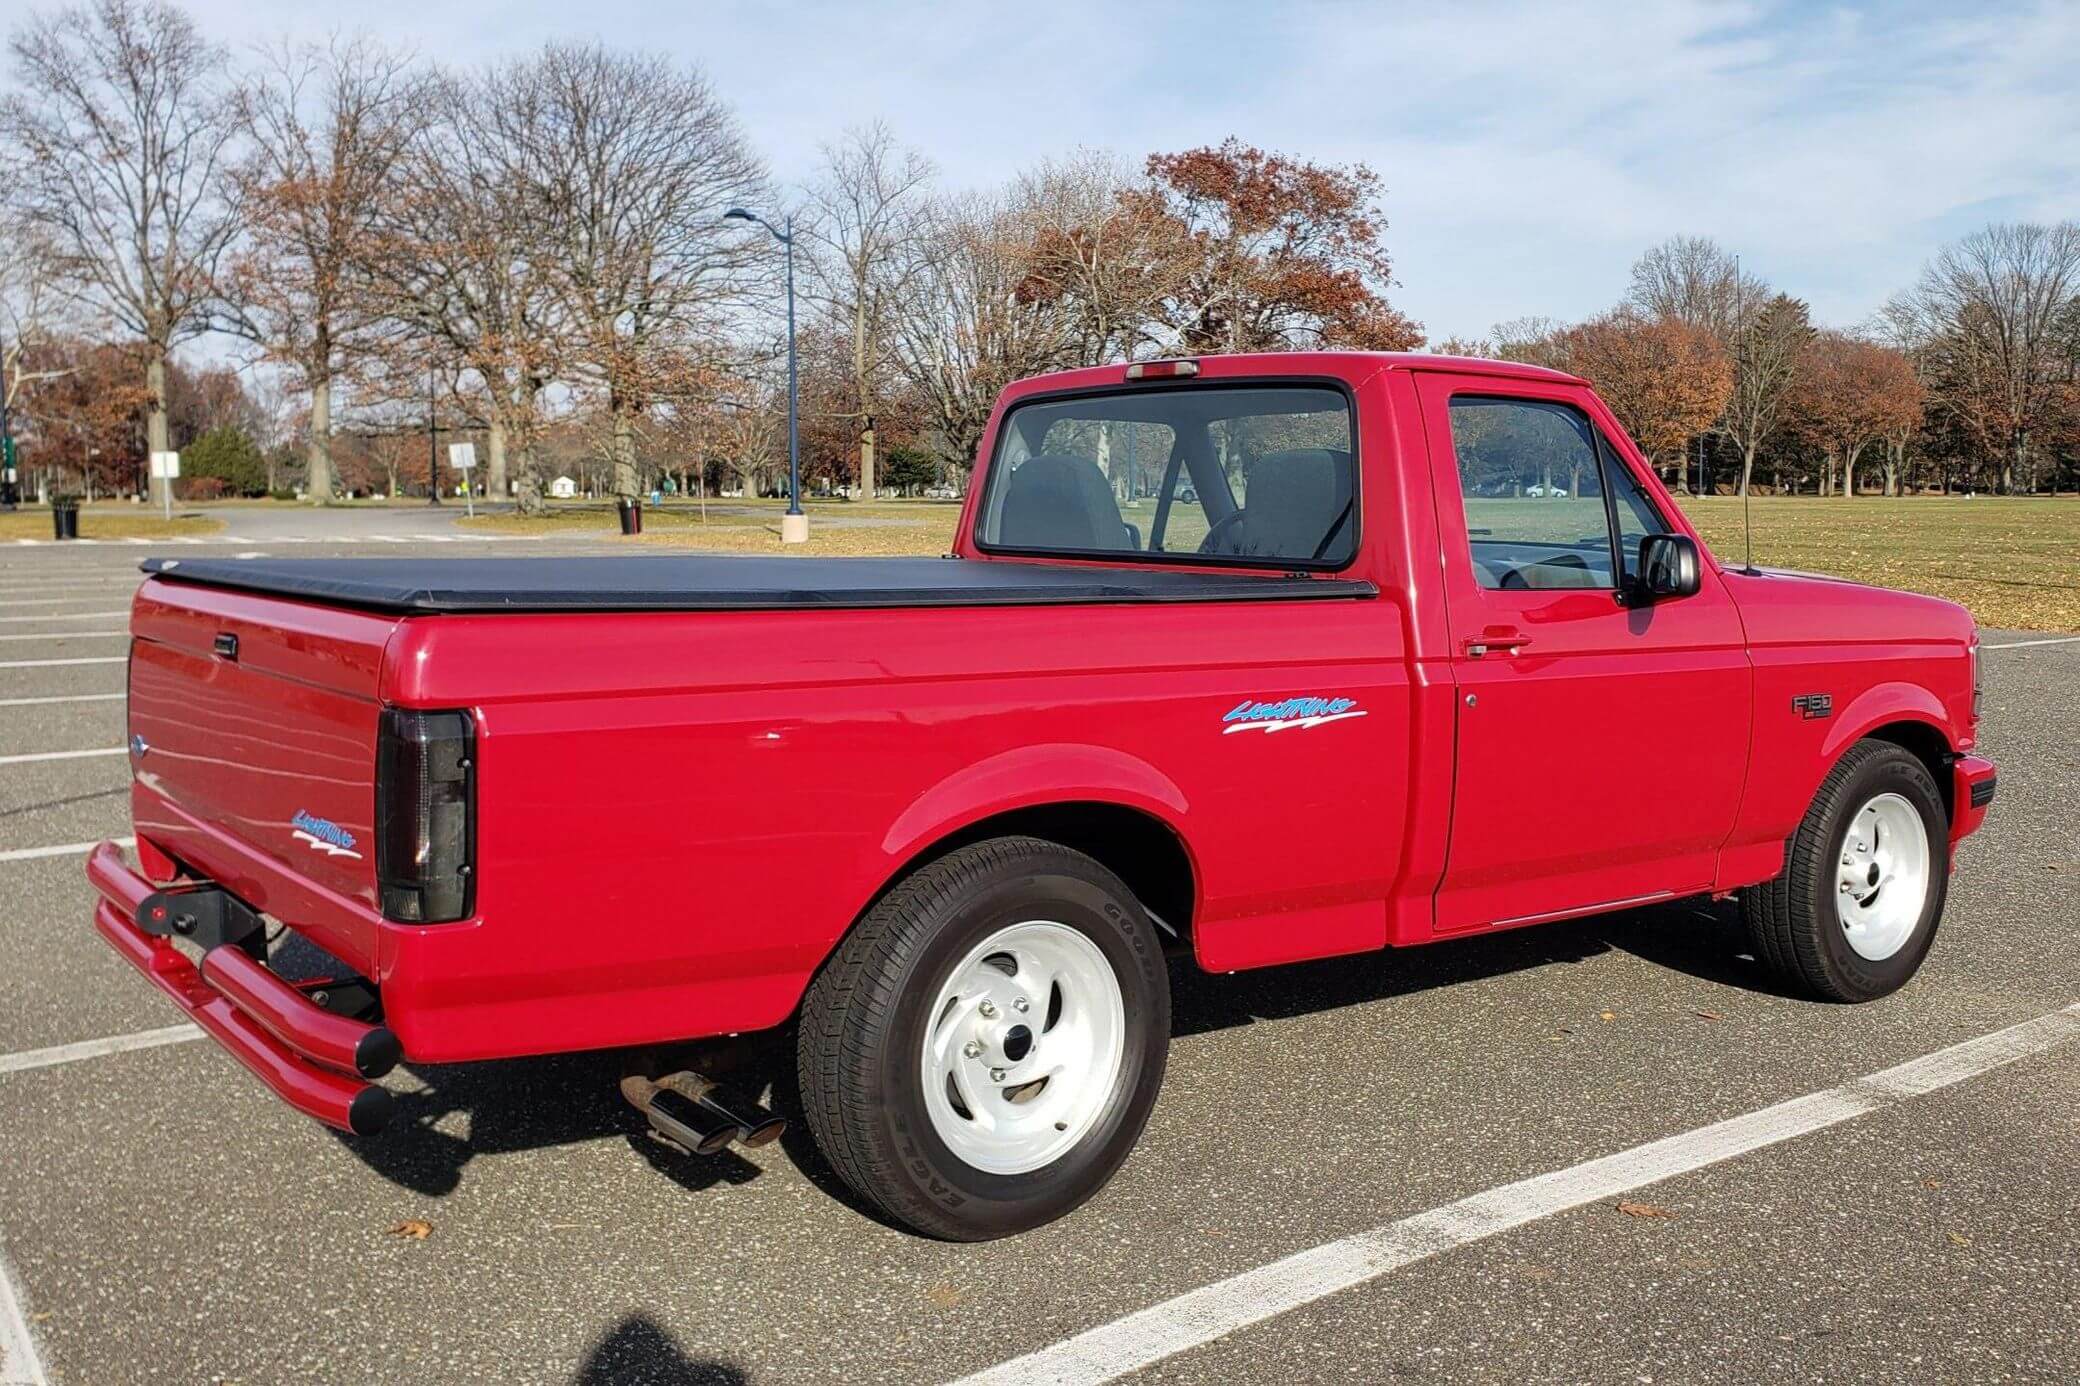 Red Ford F-150 Lightning used supertruck in a parking lot, trees visible in the background.